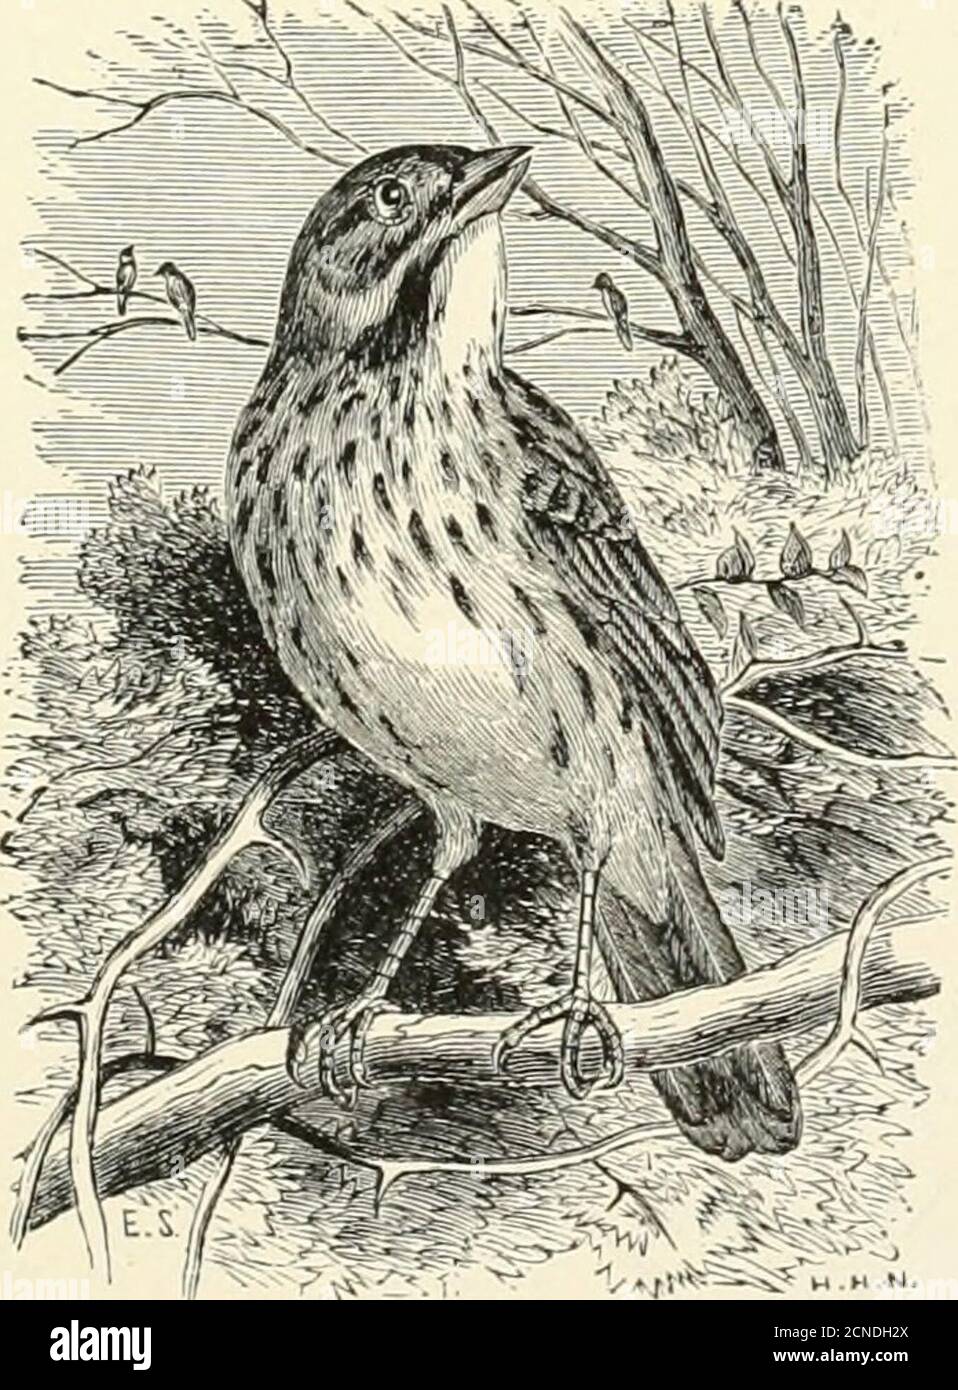 . The birds of Illinois and Wisconsin . atter in Richland county, Illinois.(Orn. of 111., 1889, p. 281.) Mr. Nelson gives it as common locallyin Wabash, Richland, and adjoining counties (Birds N. E. 111., 1876,p. 151), and Mr. O. C. Poling shot three birds of this species in anapple orchard at Quincy, 111., in May, 1887. (The Auk, 1890, p. 242.) Mr. Isaac E. Hess found a nest and four eggs of this species atPhilo, 111., Champaign Co., on May 26, 1896 (Nidologist, Vol IV,1897, p. 45)- The nest is made of grass and is built on the ground. The eggsare from 3 to 5, pure white or pale bluish white, Stock Photo